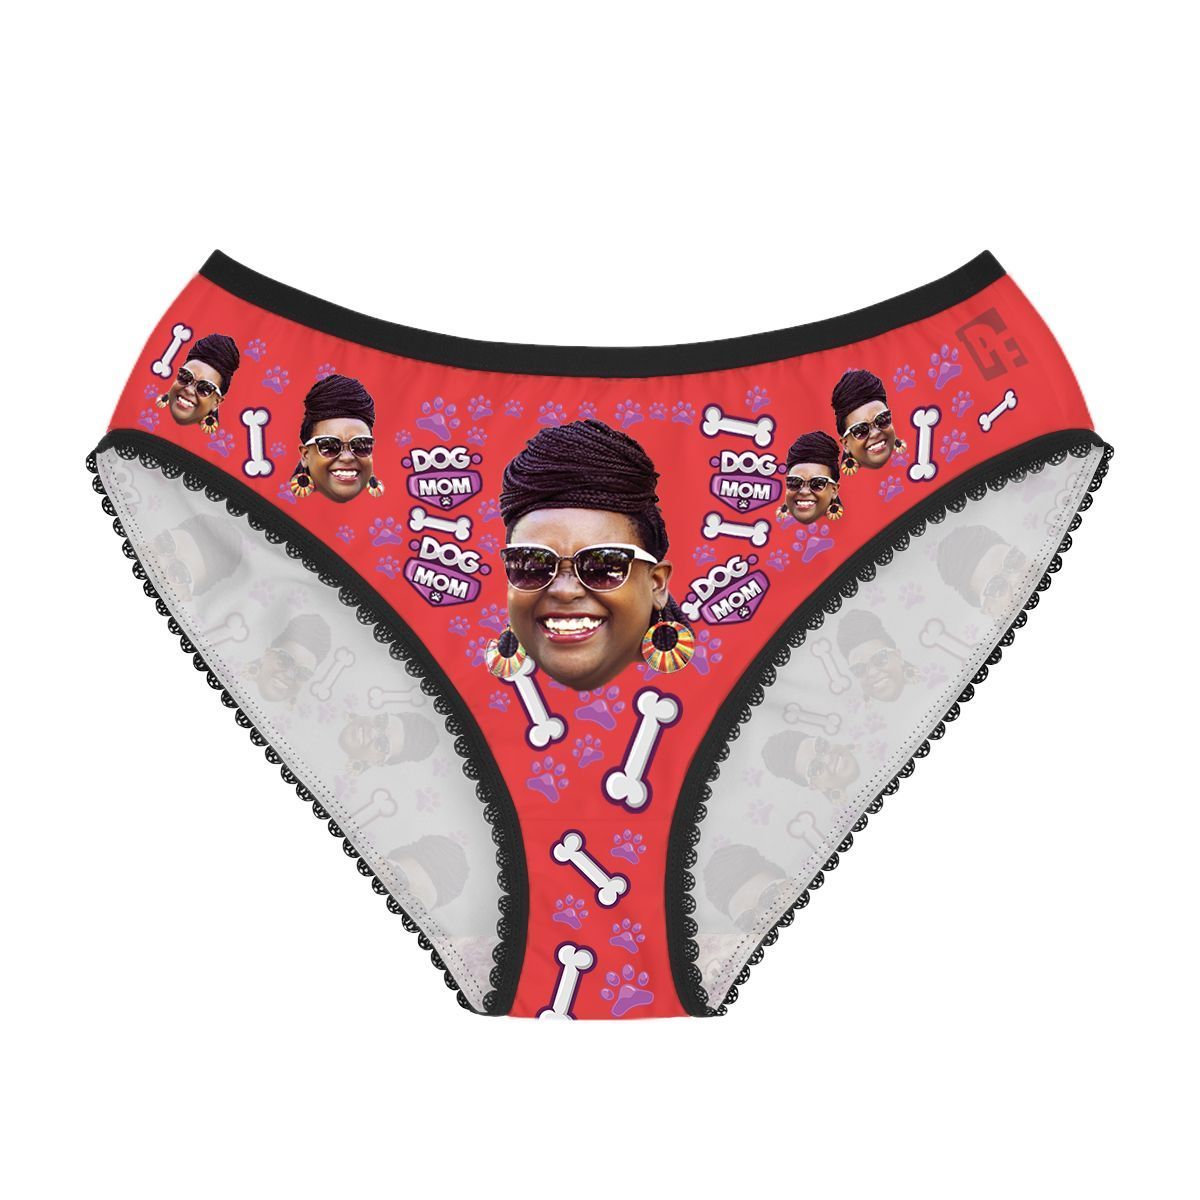 Red Dog mom women's underwear briefs personalized with photo printed on them